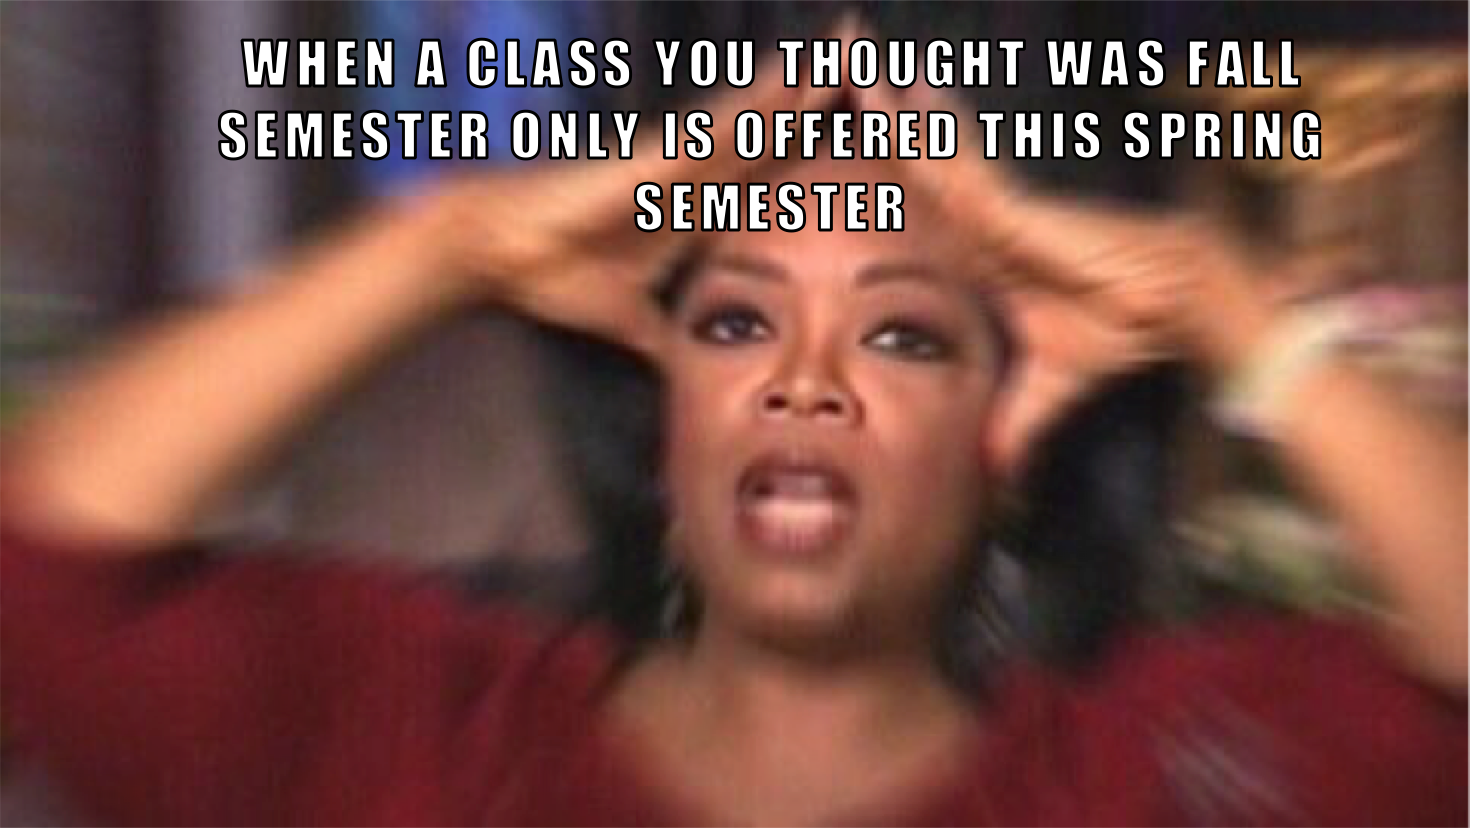 oprah freaking out meme about a class that you thought was only offered in fall is actually also offered in spring :O